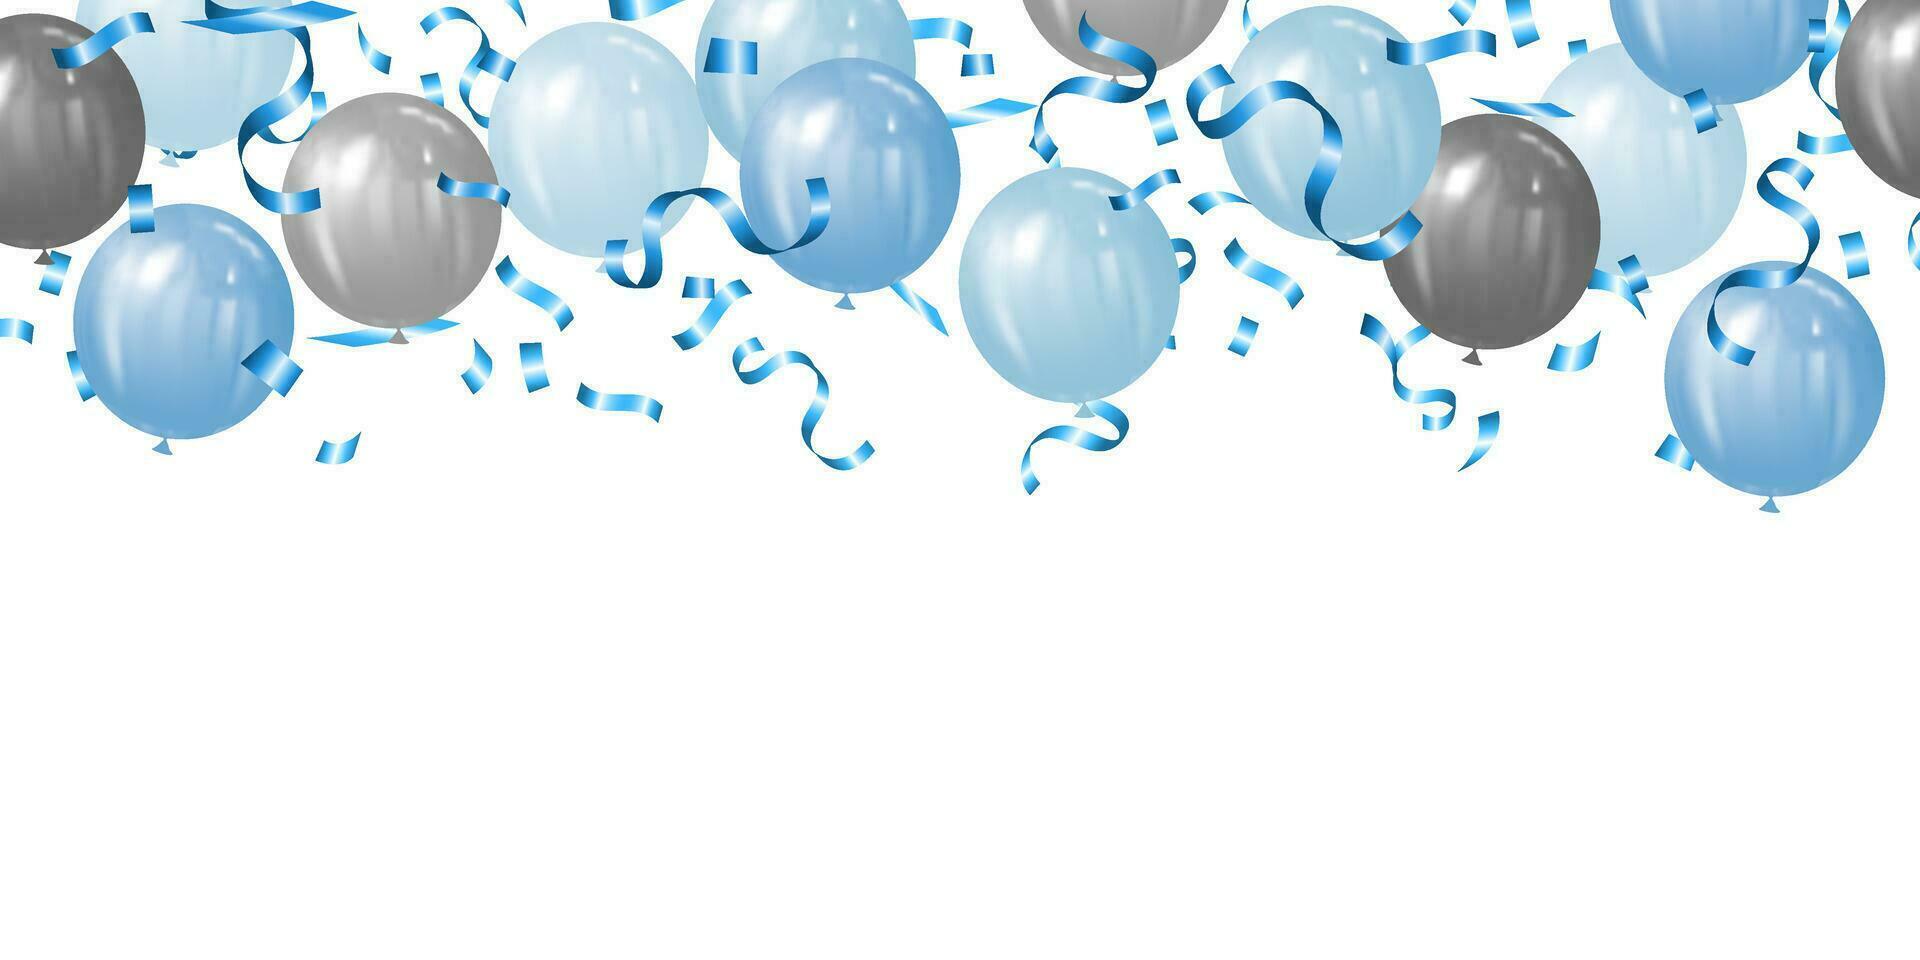 background vector illustration of blue and silver balloons and blue confetti for fathers day